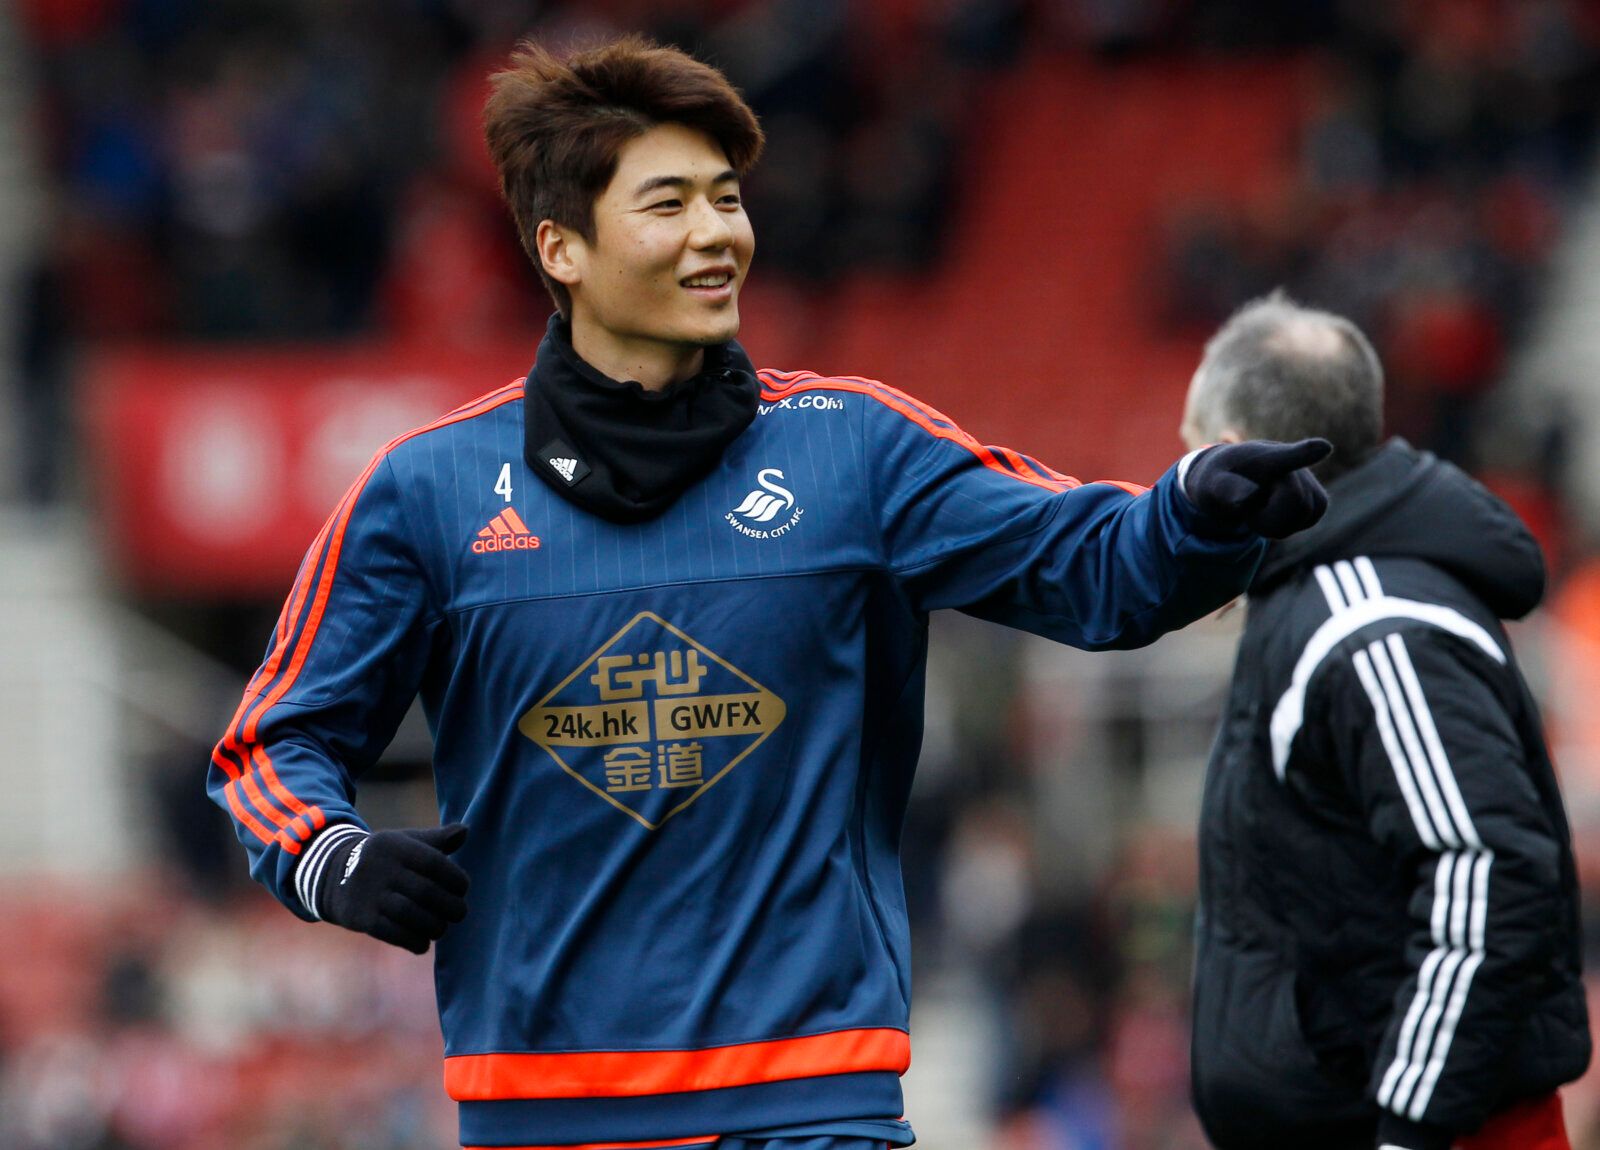 Football Soccer - Stoke City v Swansea City  - Barclays Premier League - The Britannia Stadium - 2/4/16 
Swansea's Ki Sung-Yeung before the match 
Mandatory Credit: Action Images / Craig Brough 
Livepic 
EDITORIAL USE ONLY. No use with unauthorized audio, video, data, fixture lists, club/league logos or 